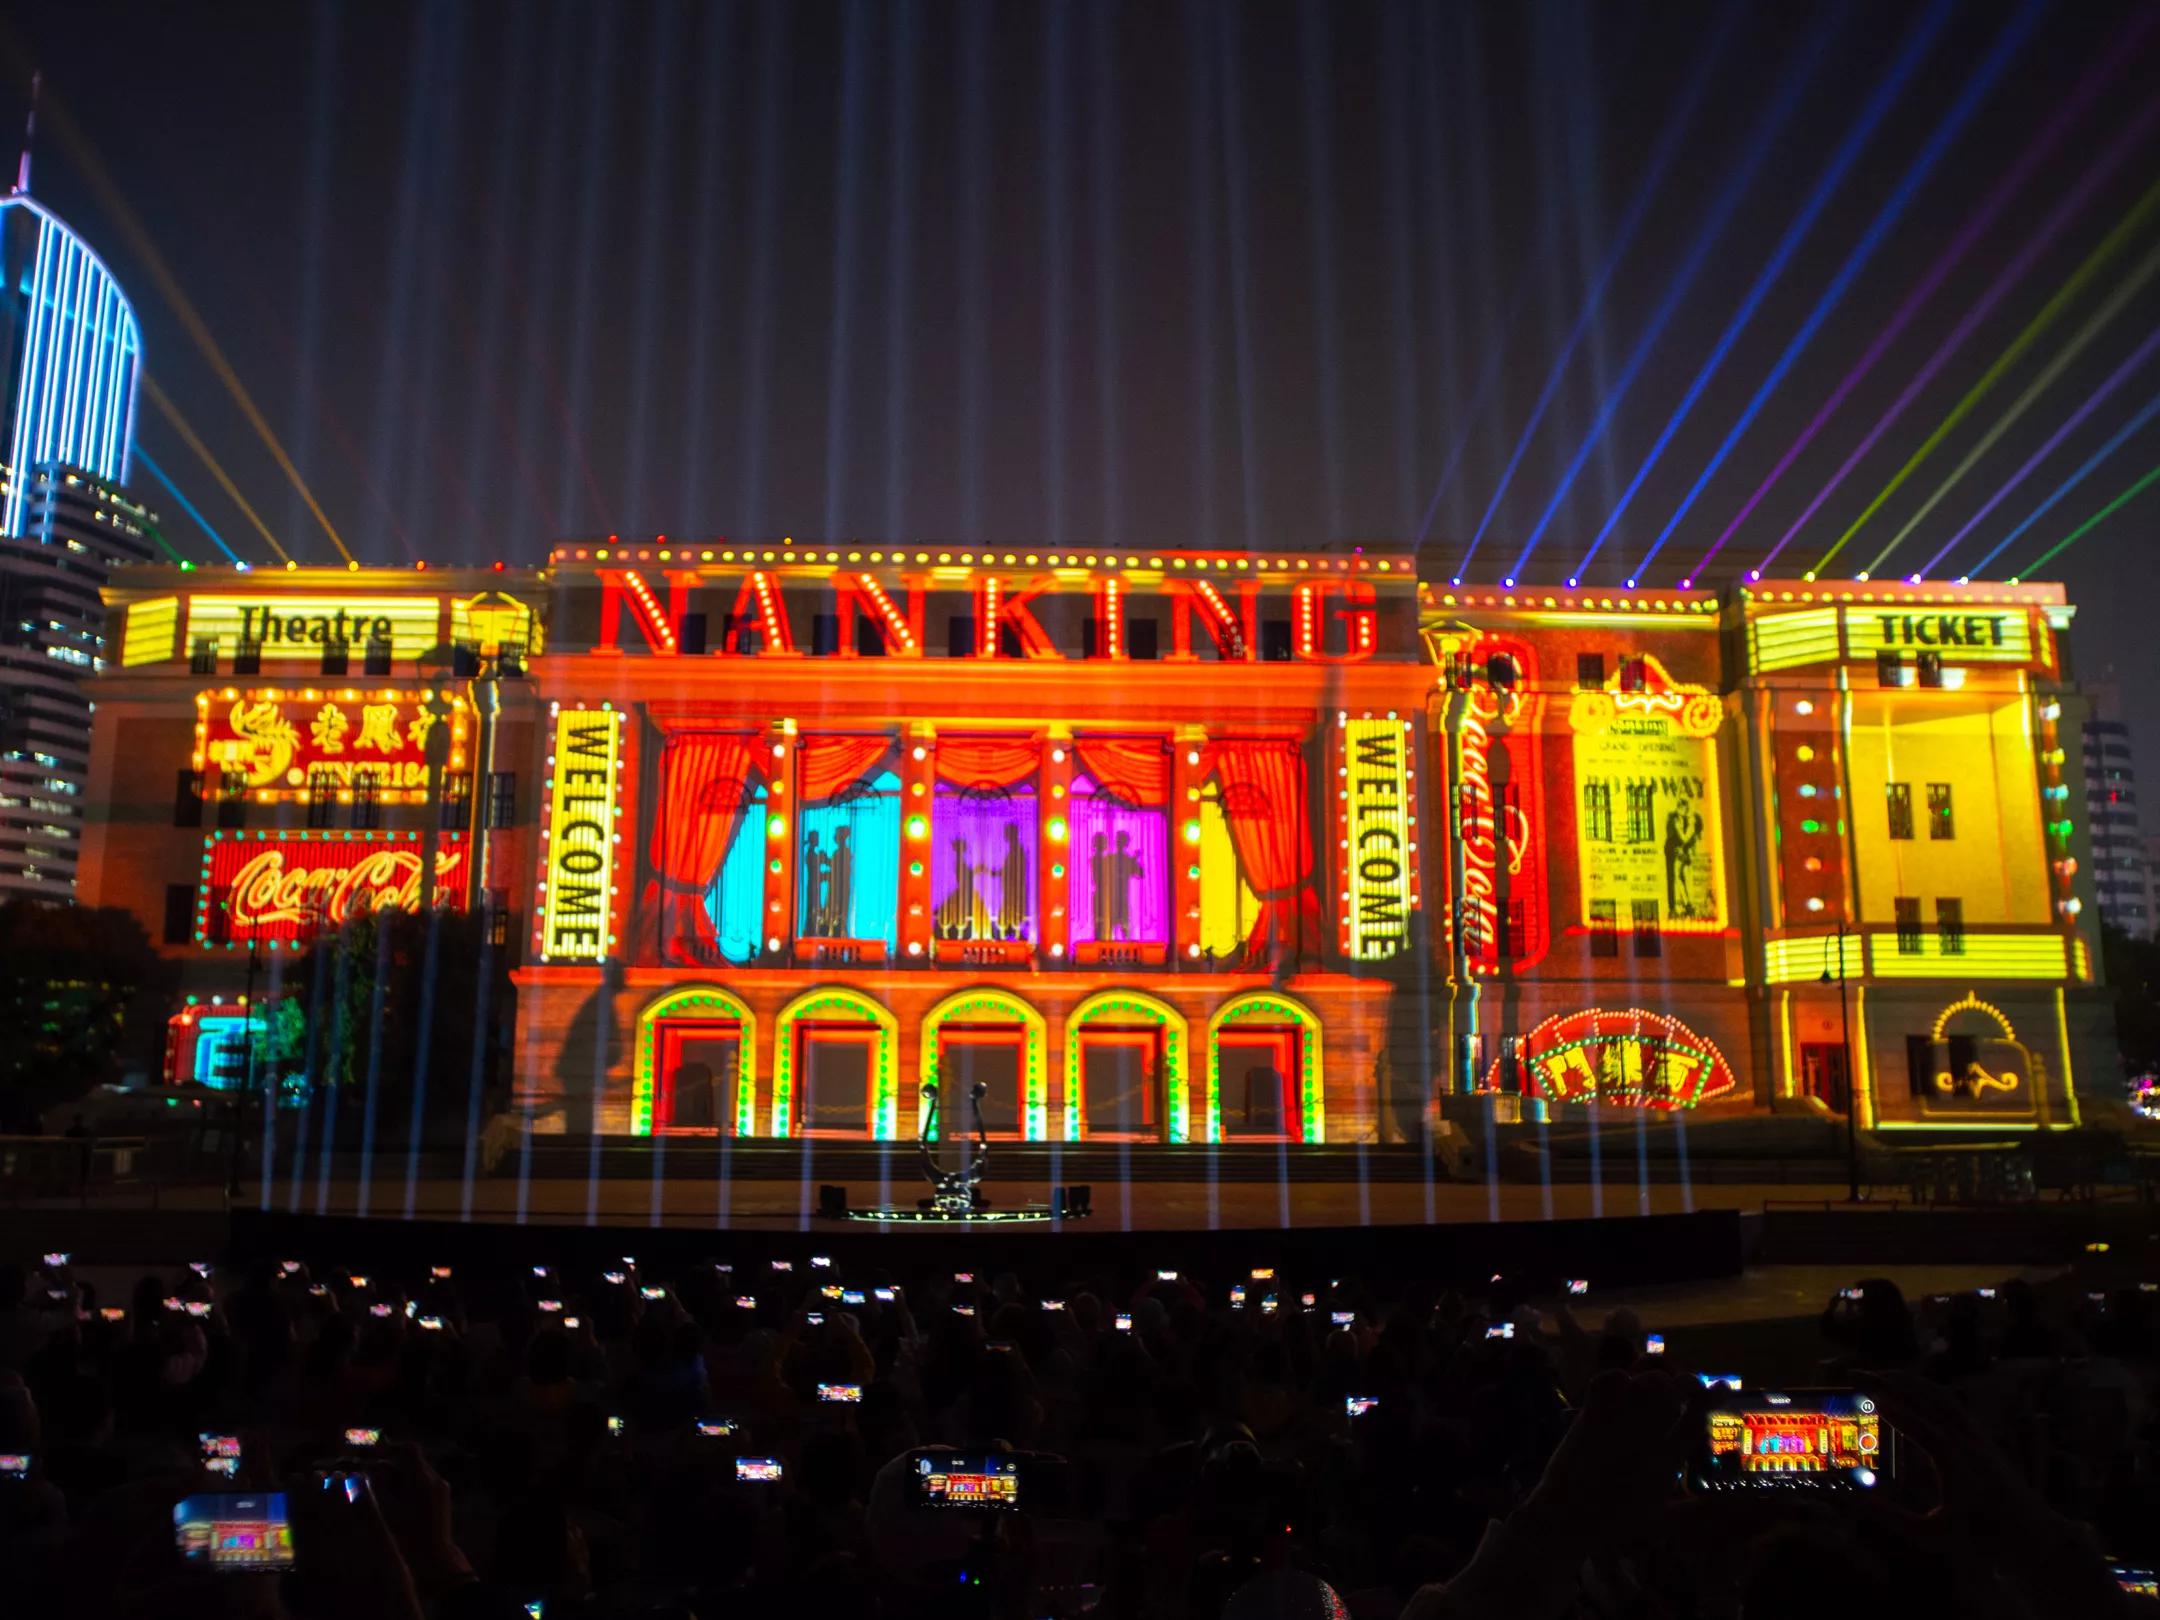 Animating historical art with a projection mapping show at